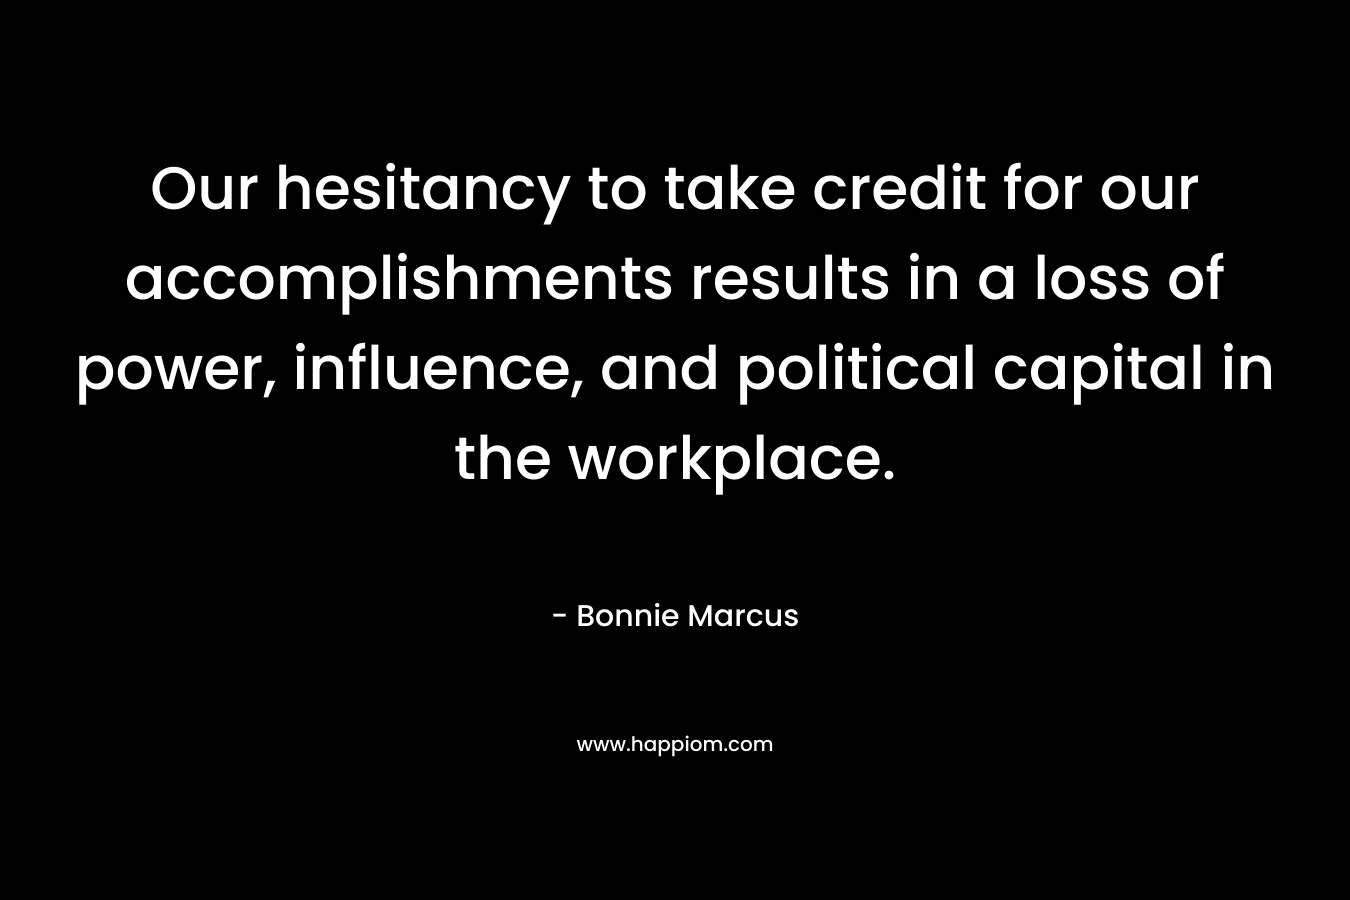 Our hesitancy to take credit for our accomplishments results in a loss of power, influence, and political capital in the workplace. – Bonnie Marcus